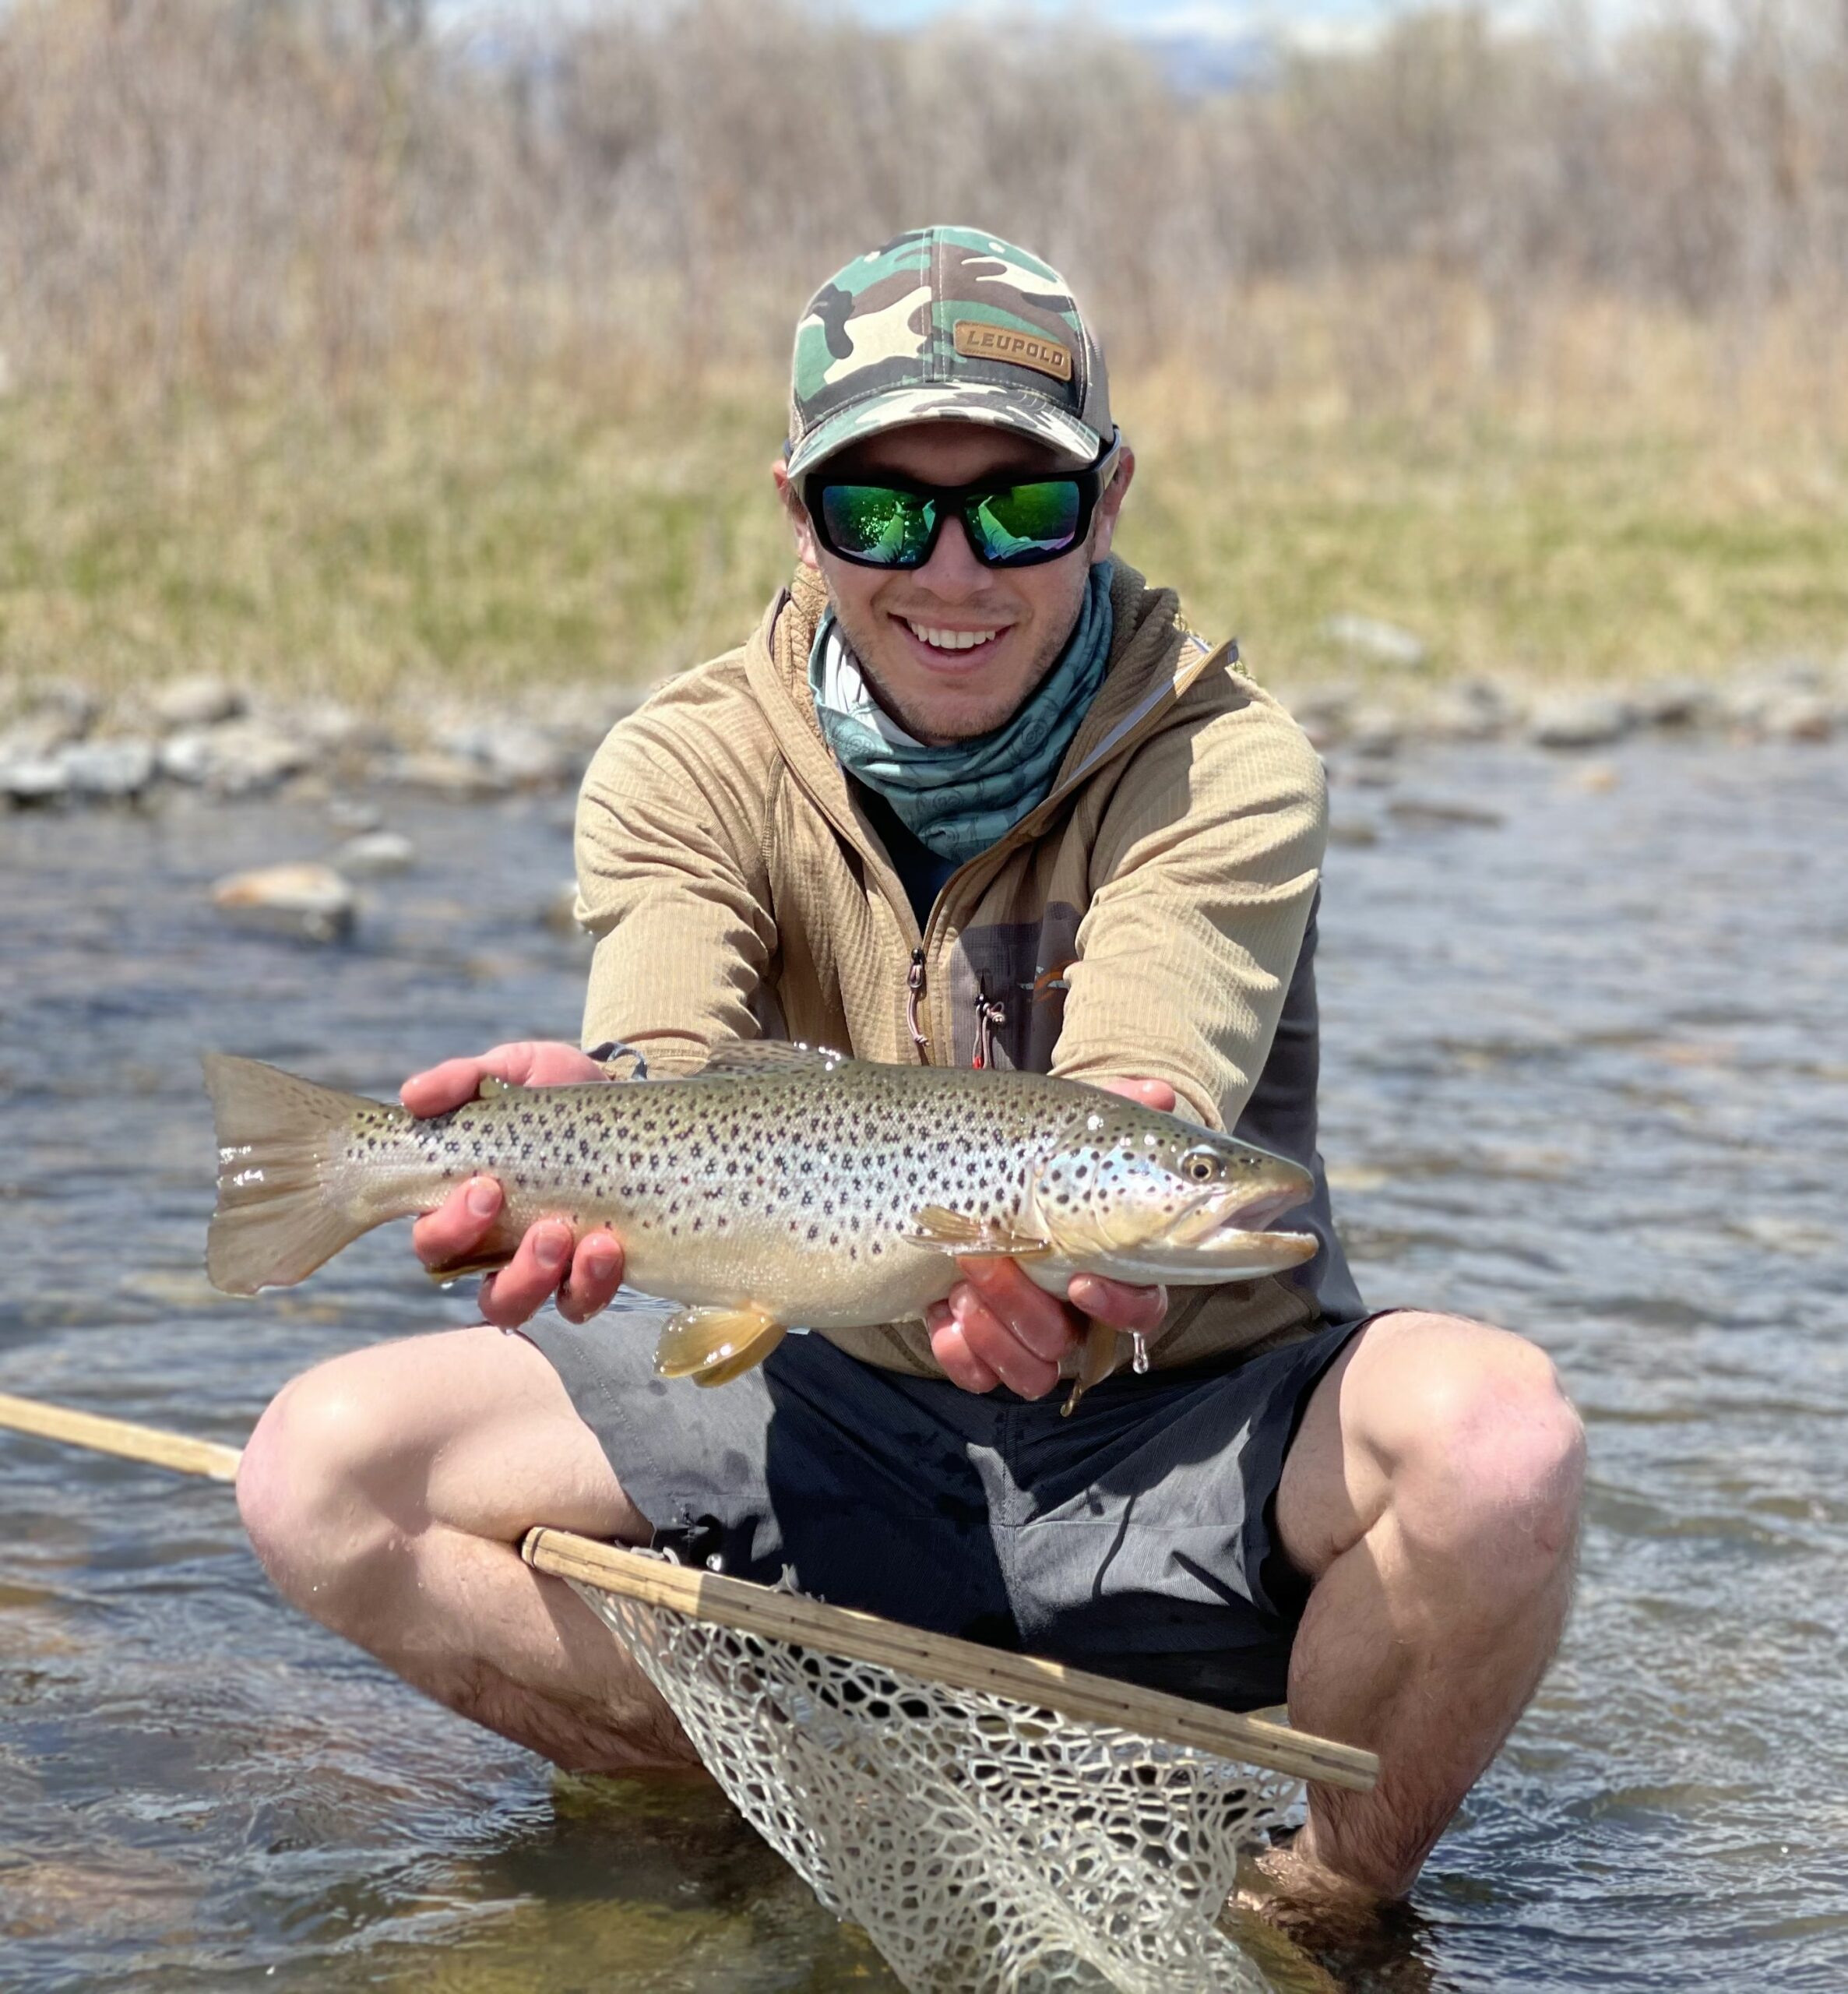 MT Trout Co guide wading, holding nice rainbow trout